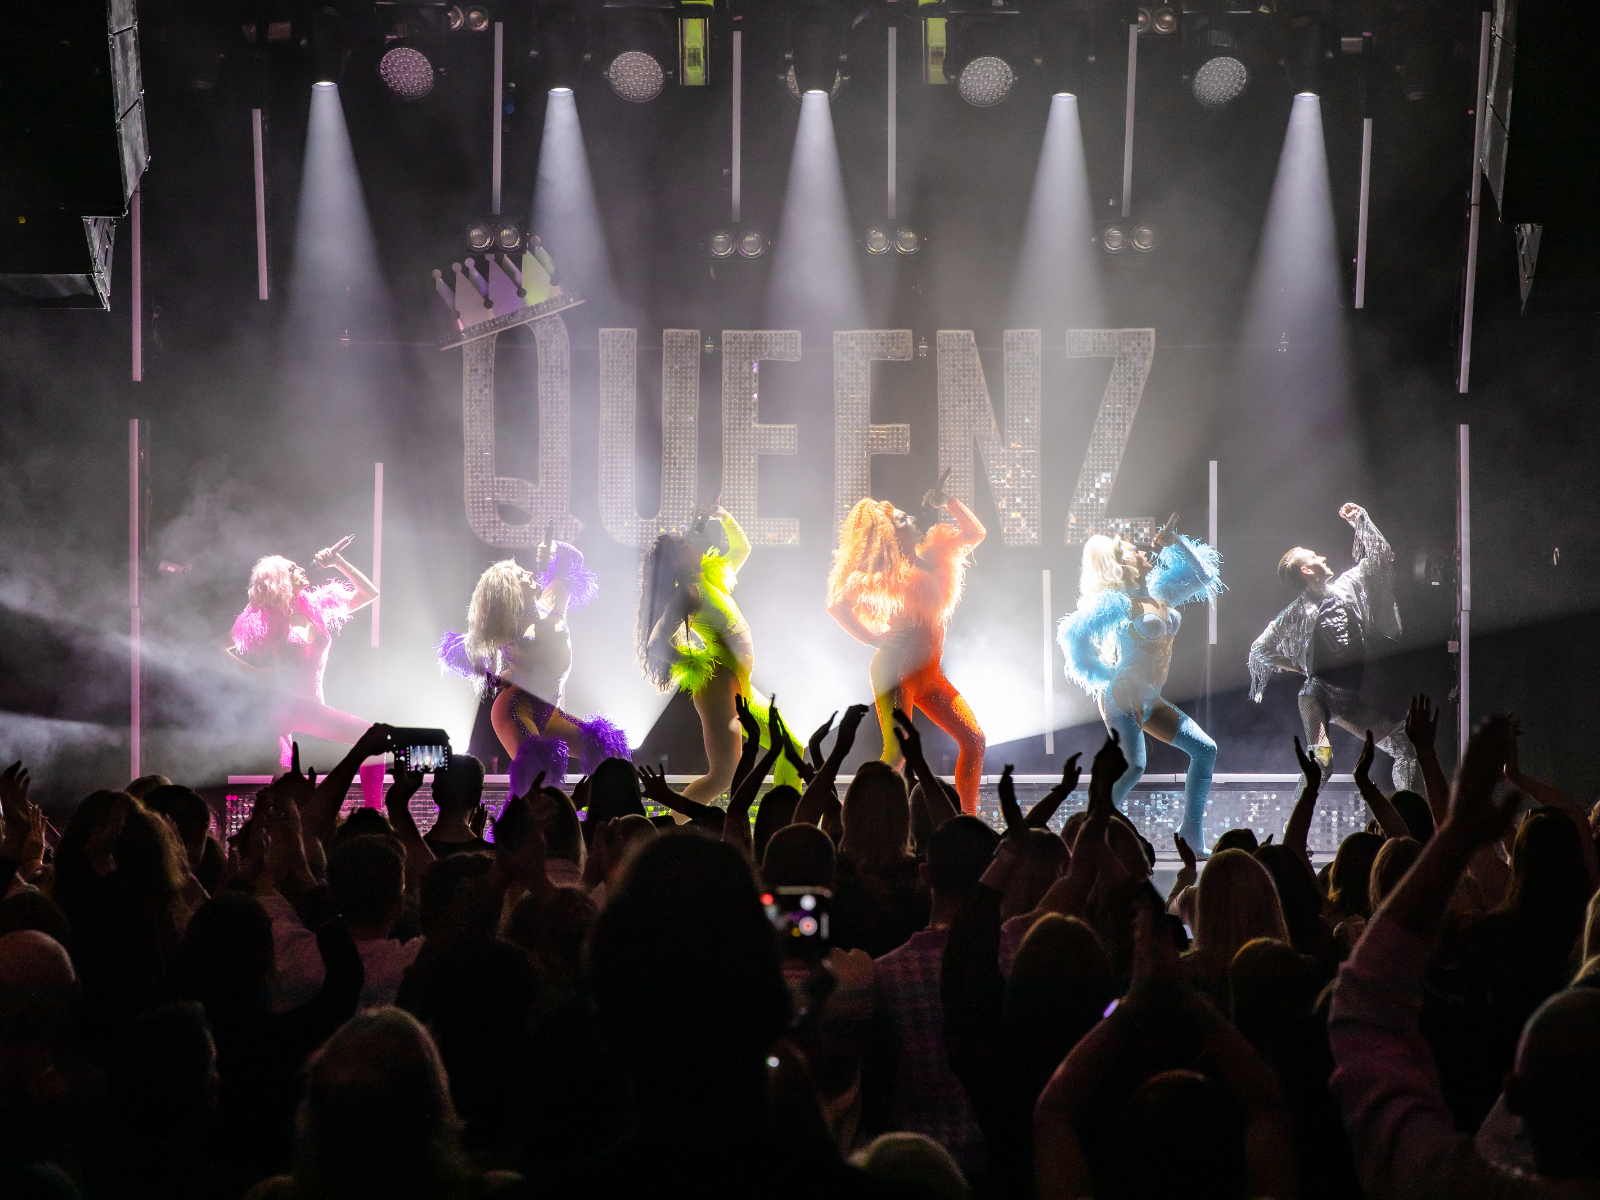 QUEENZ- The Show With BALLS!